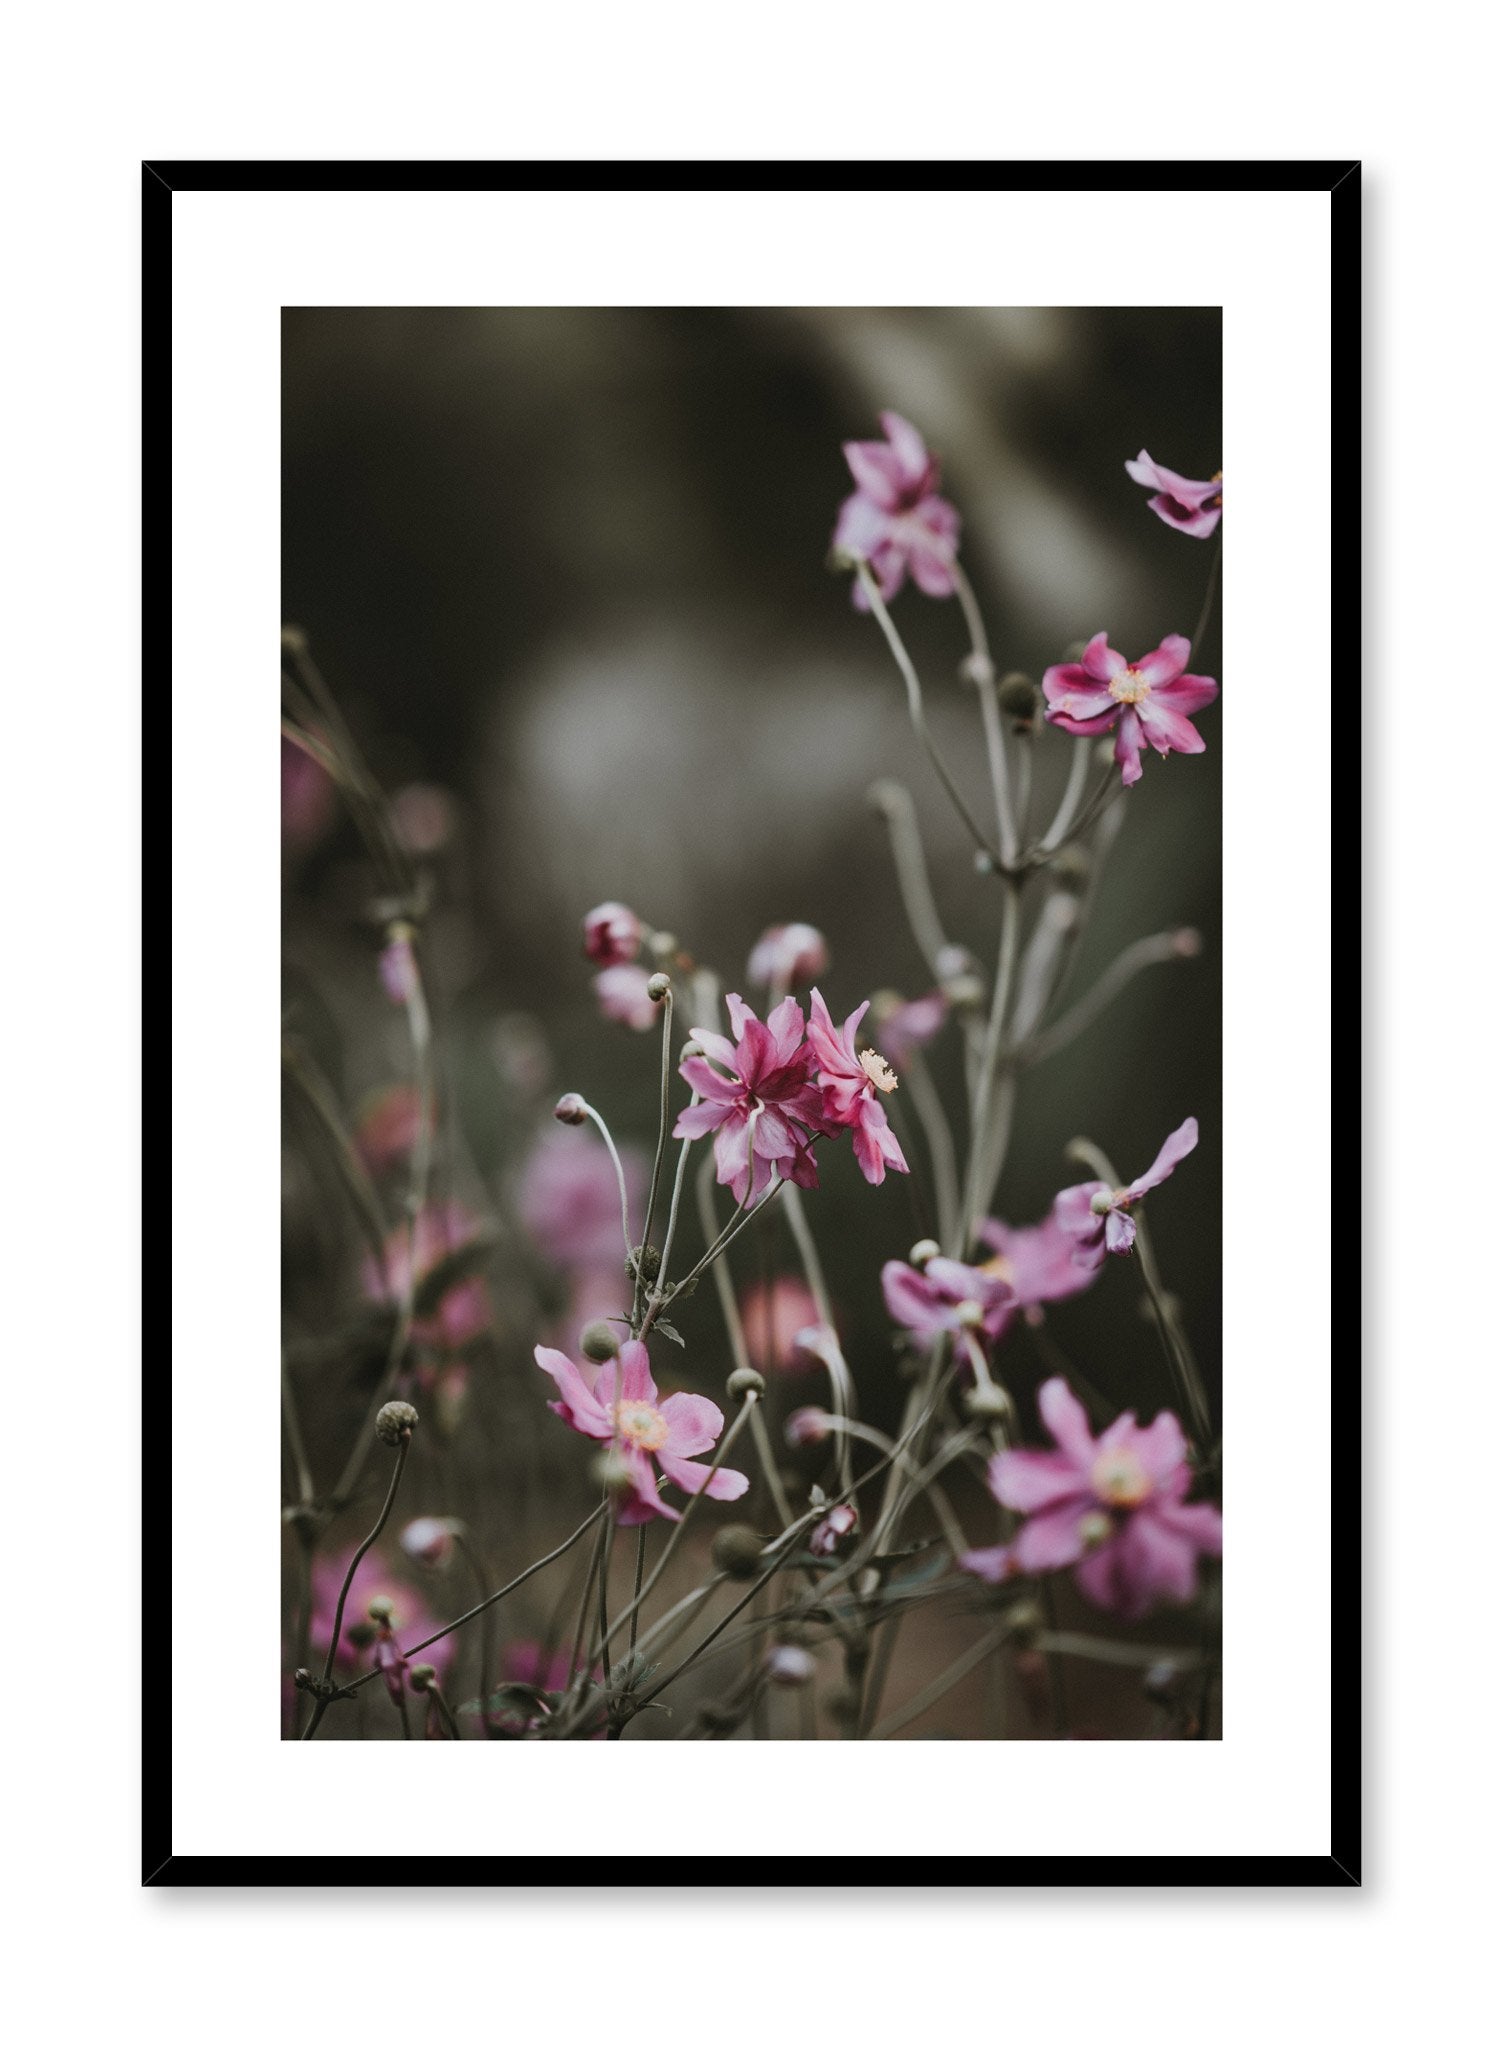 Minimalist design poster by Opposite Wall with flower photography